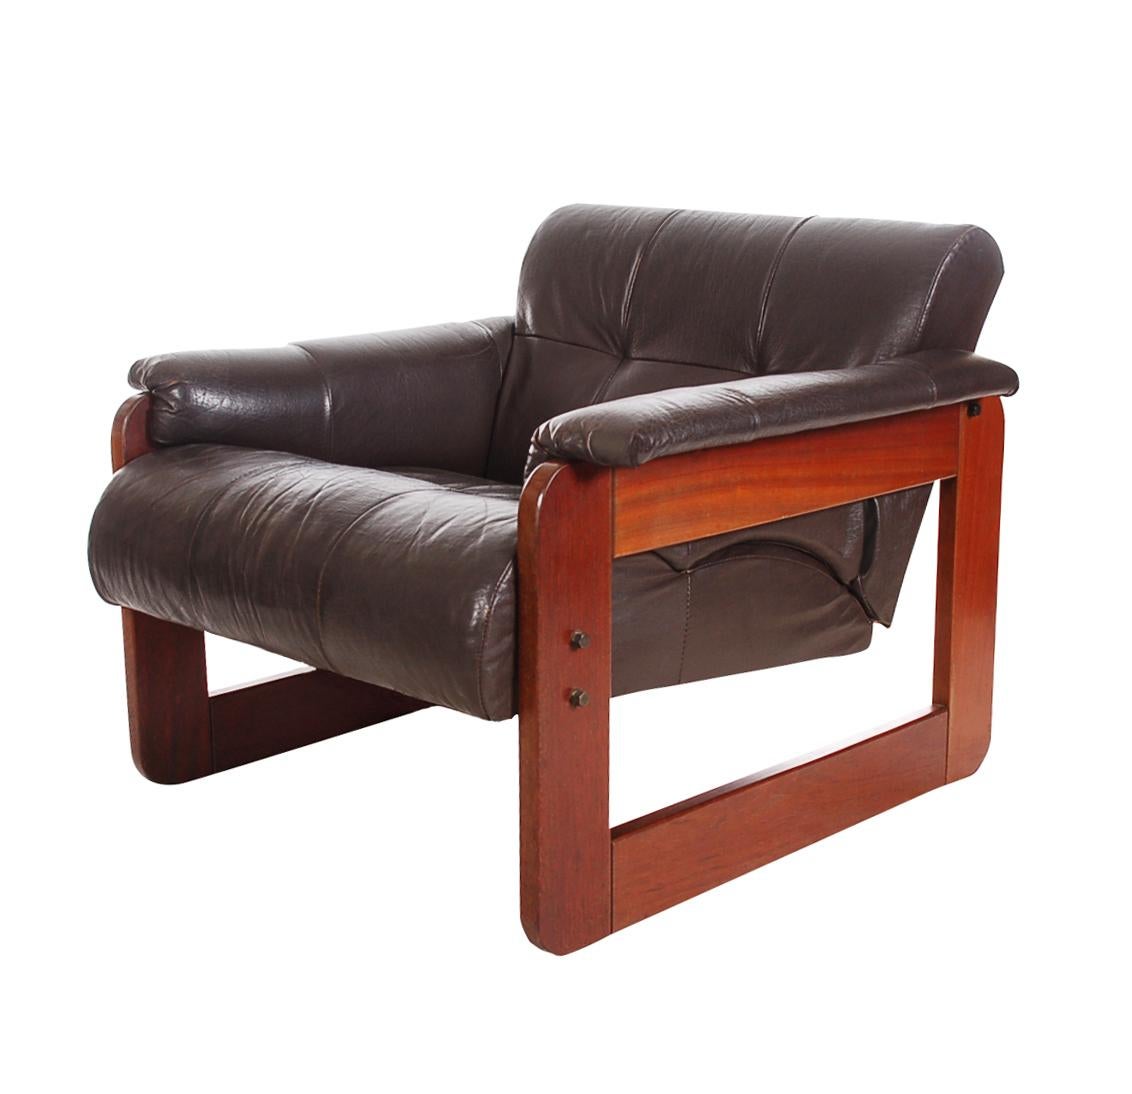 Mid-20th Century Pair of Midcentury Brazilian Modern Brown Leather Lounge Chairs